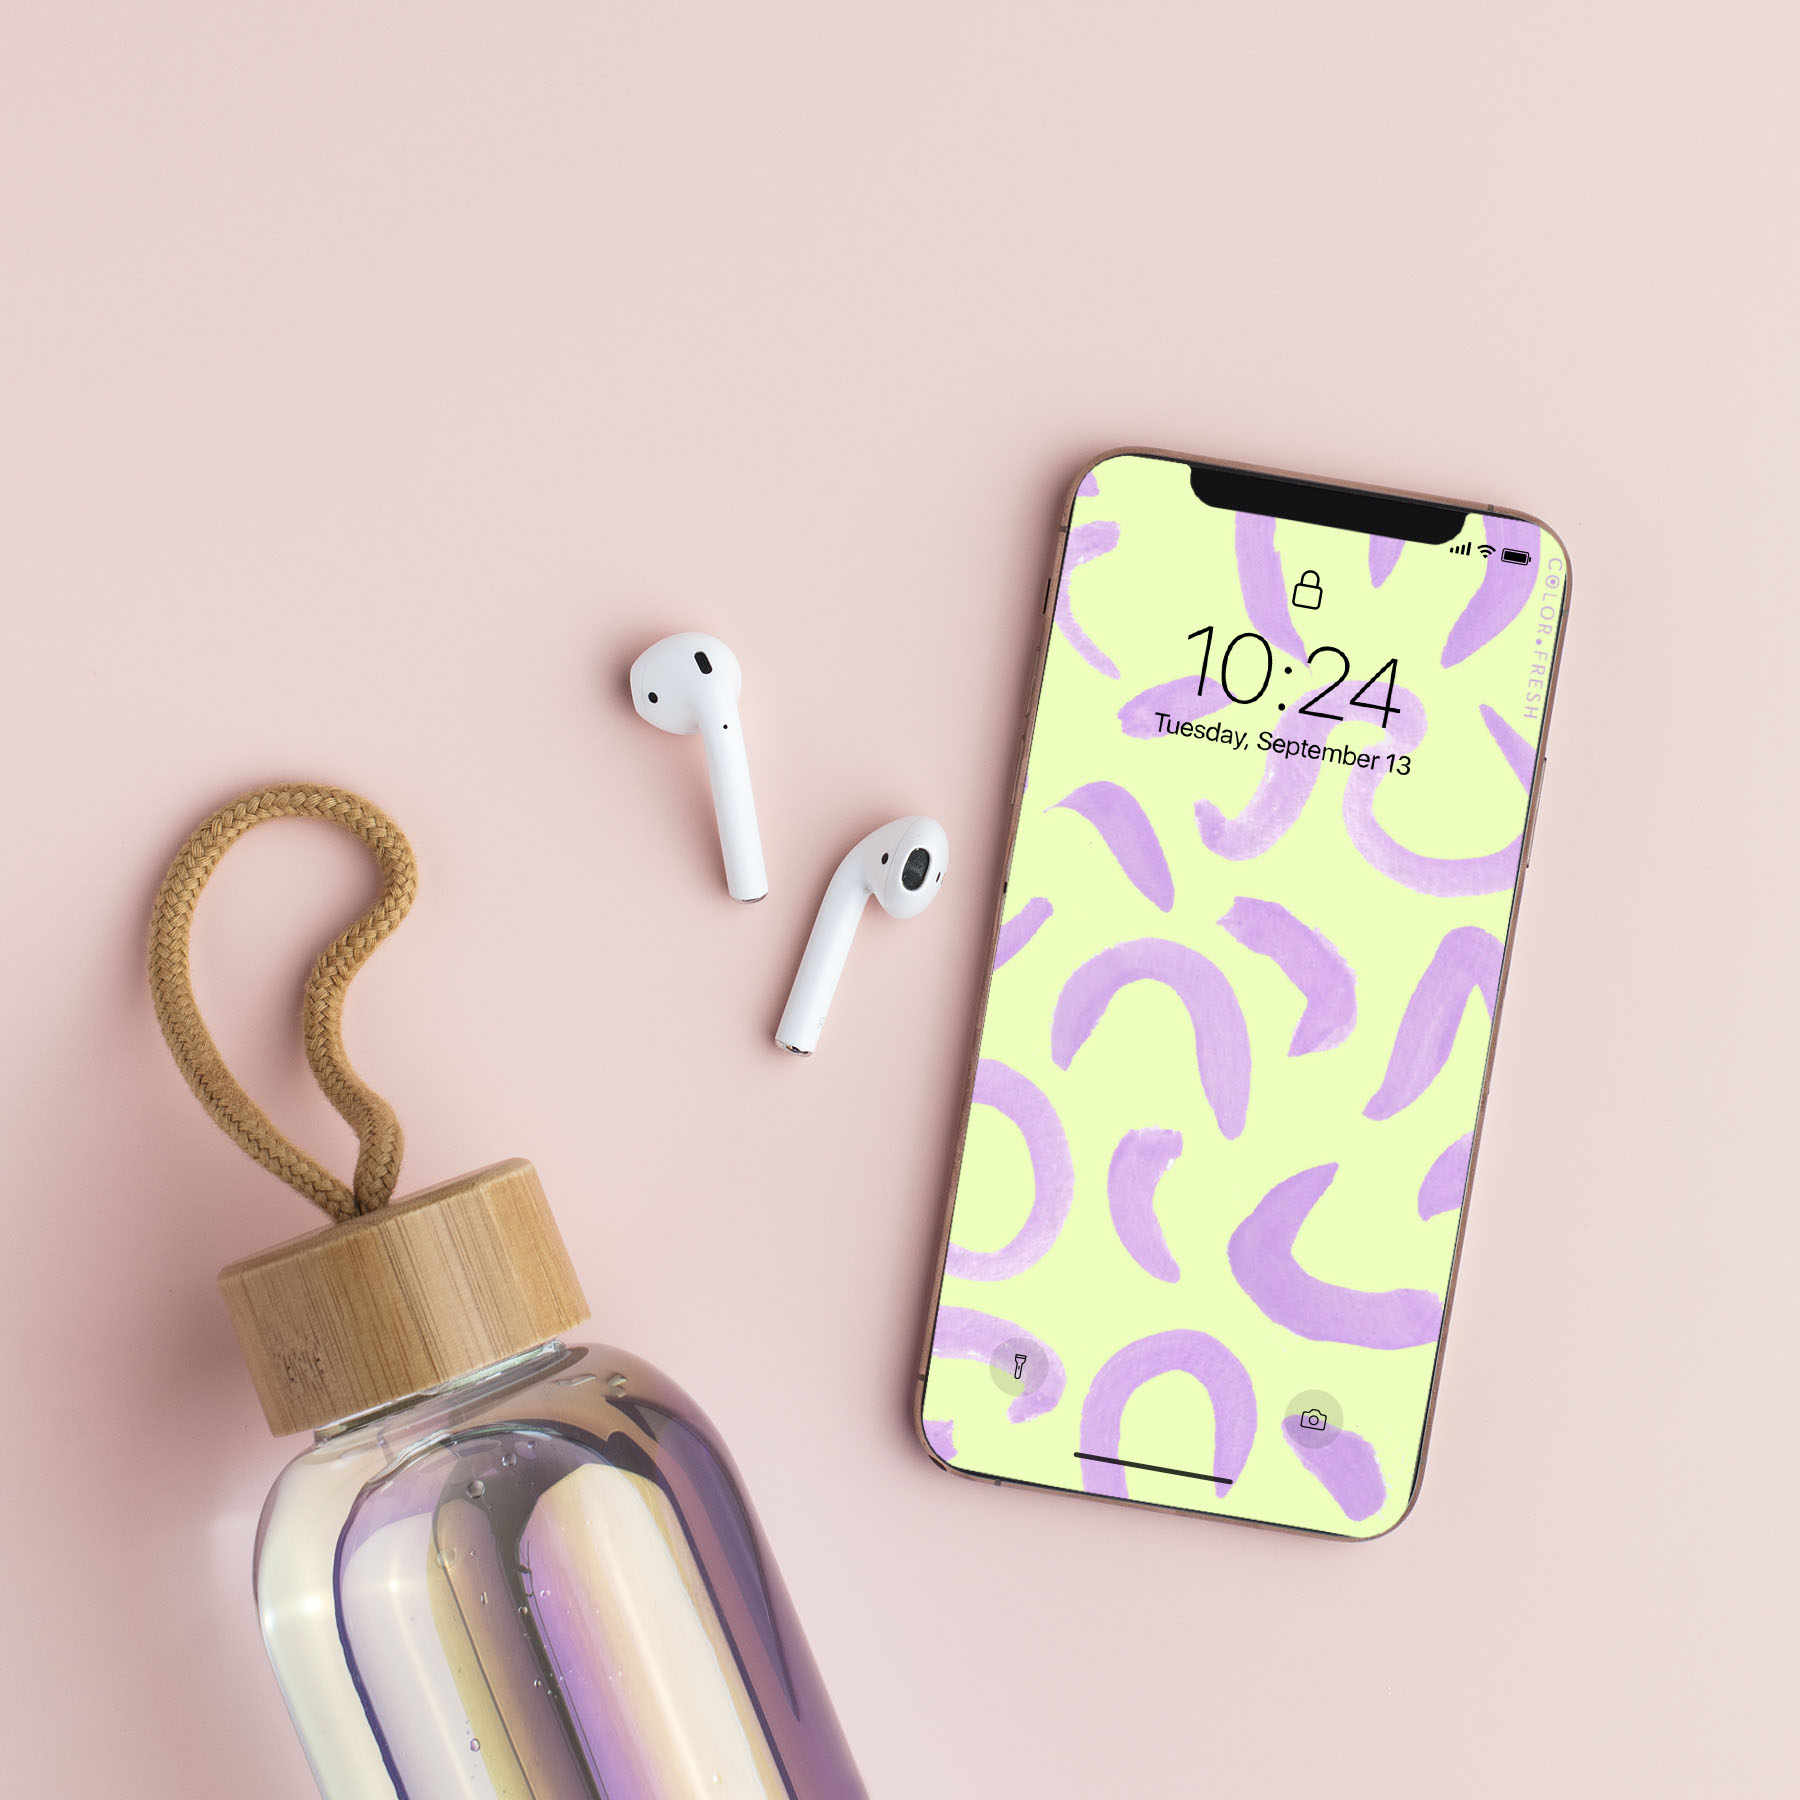 Flat lay with holographic water bottle, airpods, and iphone with painted pattern screen